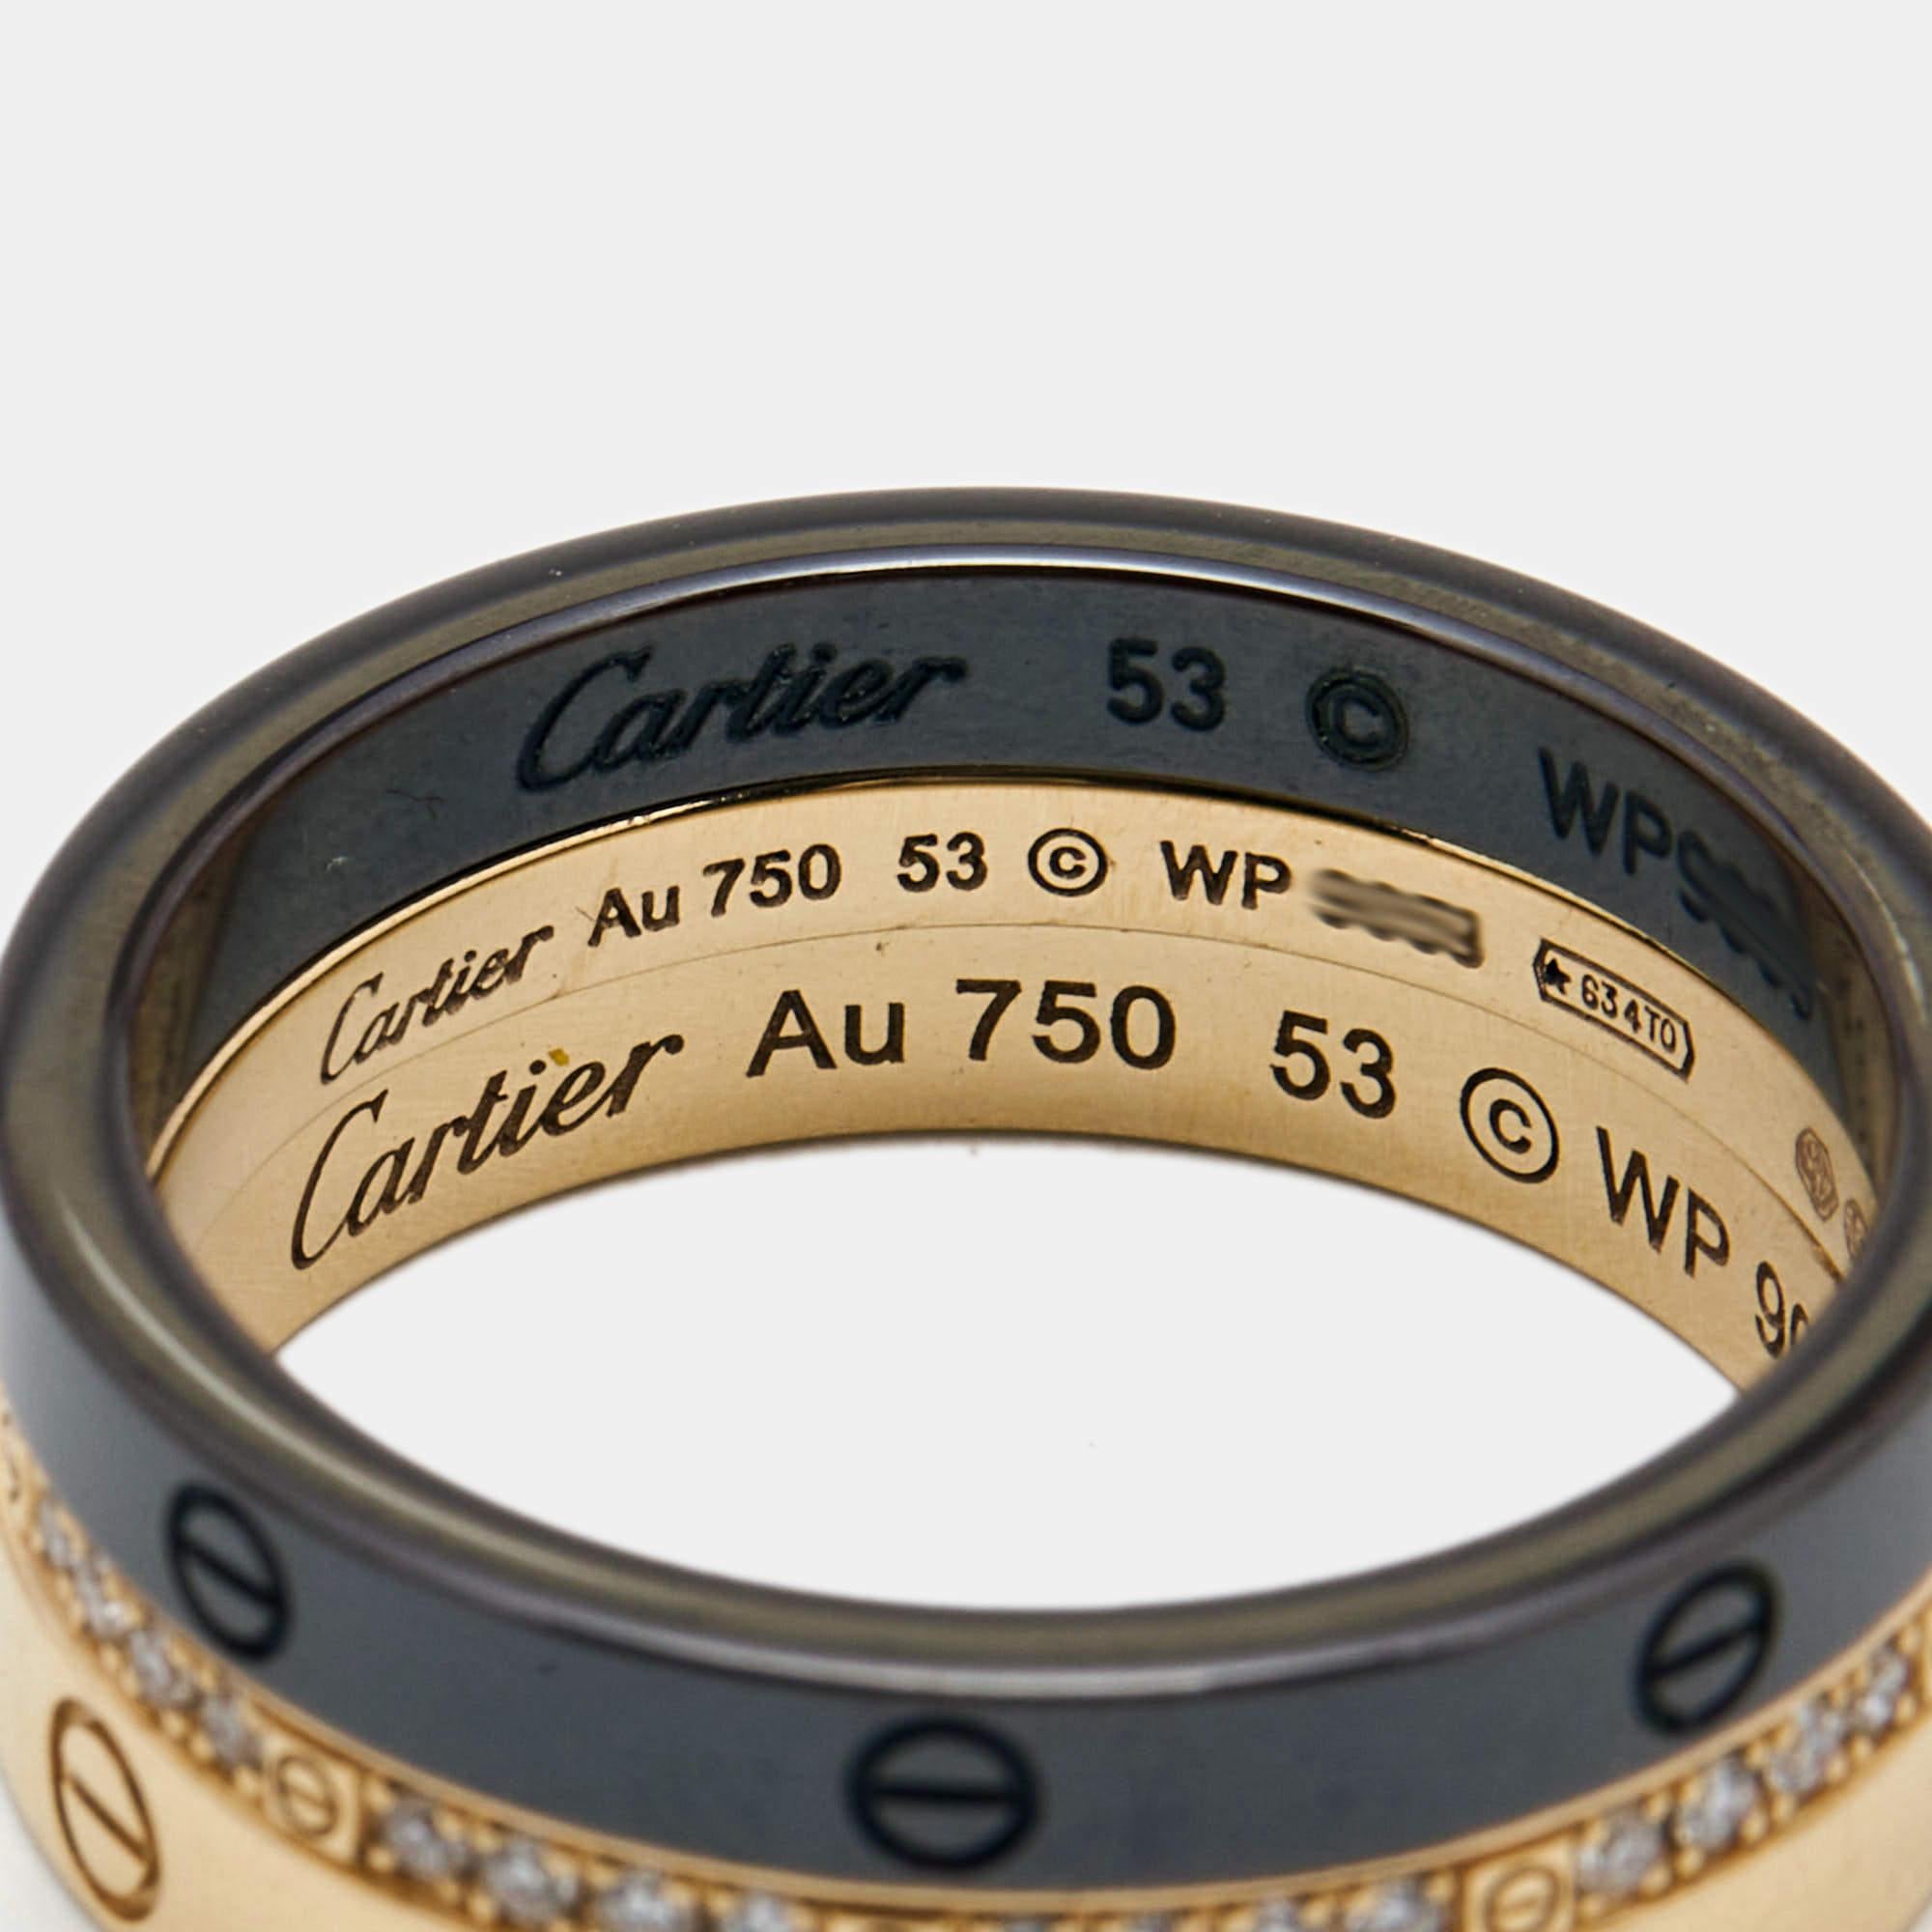 A glamorous version of the much-coveted Cartier Love ring, this piece comes in a triple-stack style. It has three rings—one 18k rose gold band with screw motifs, one 18k rose gold band with diamonds, and one ceramic band with screw motifs. They can